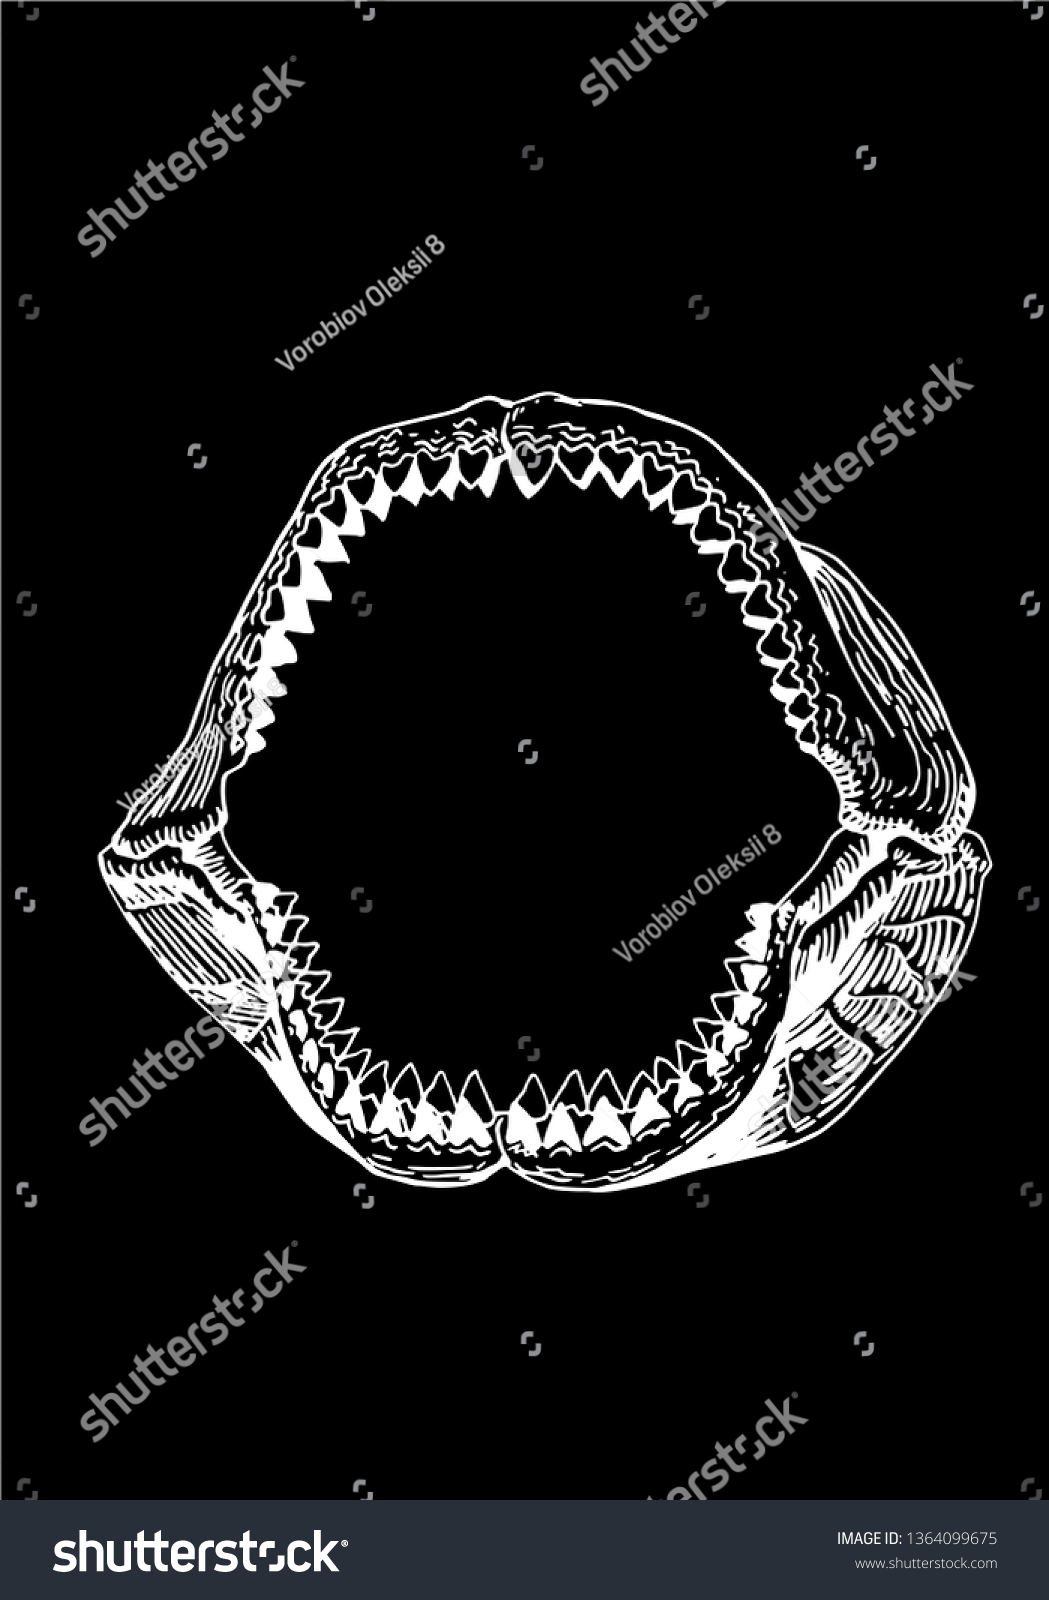 Megalodon Jaw Shark Jaw Isolated On Stock Vector (Royalty Free ...